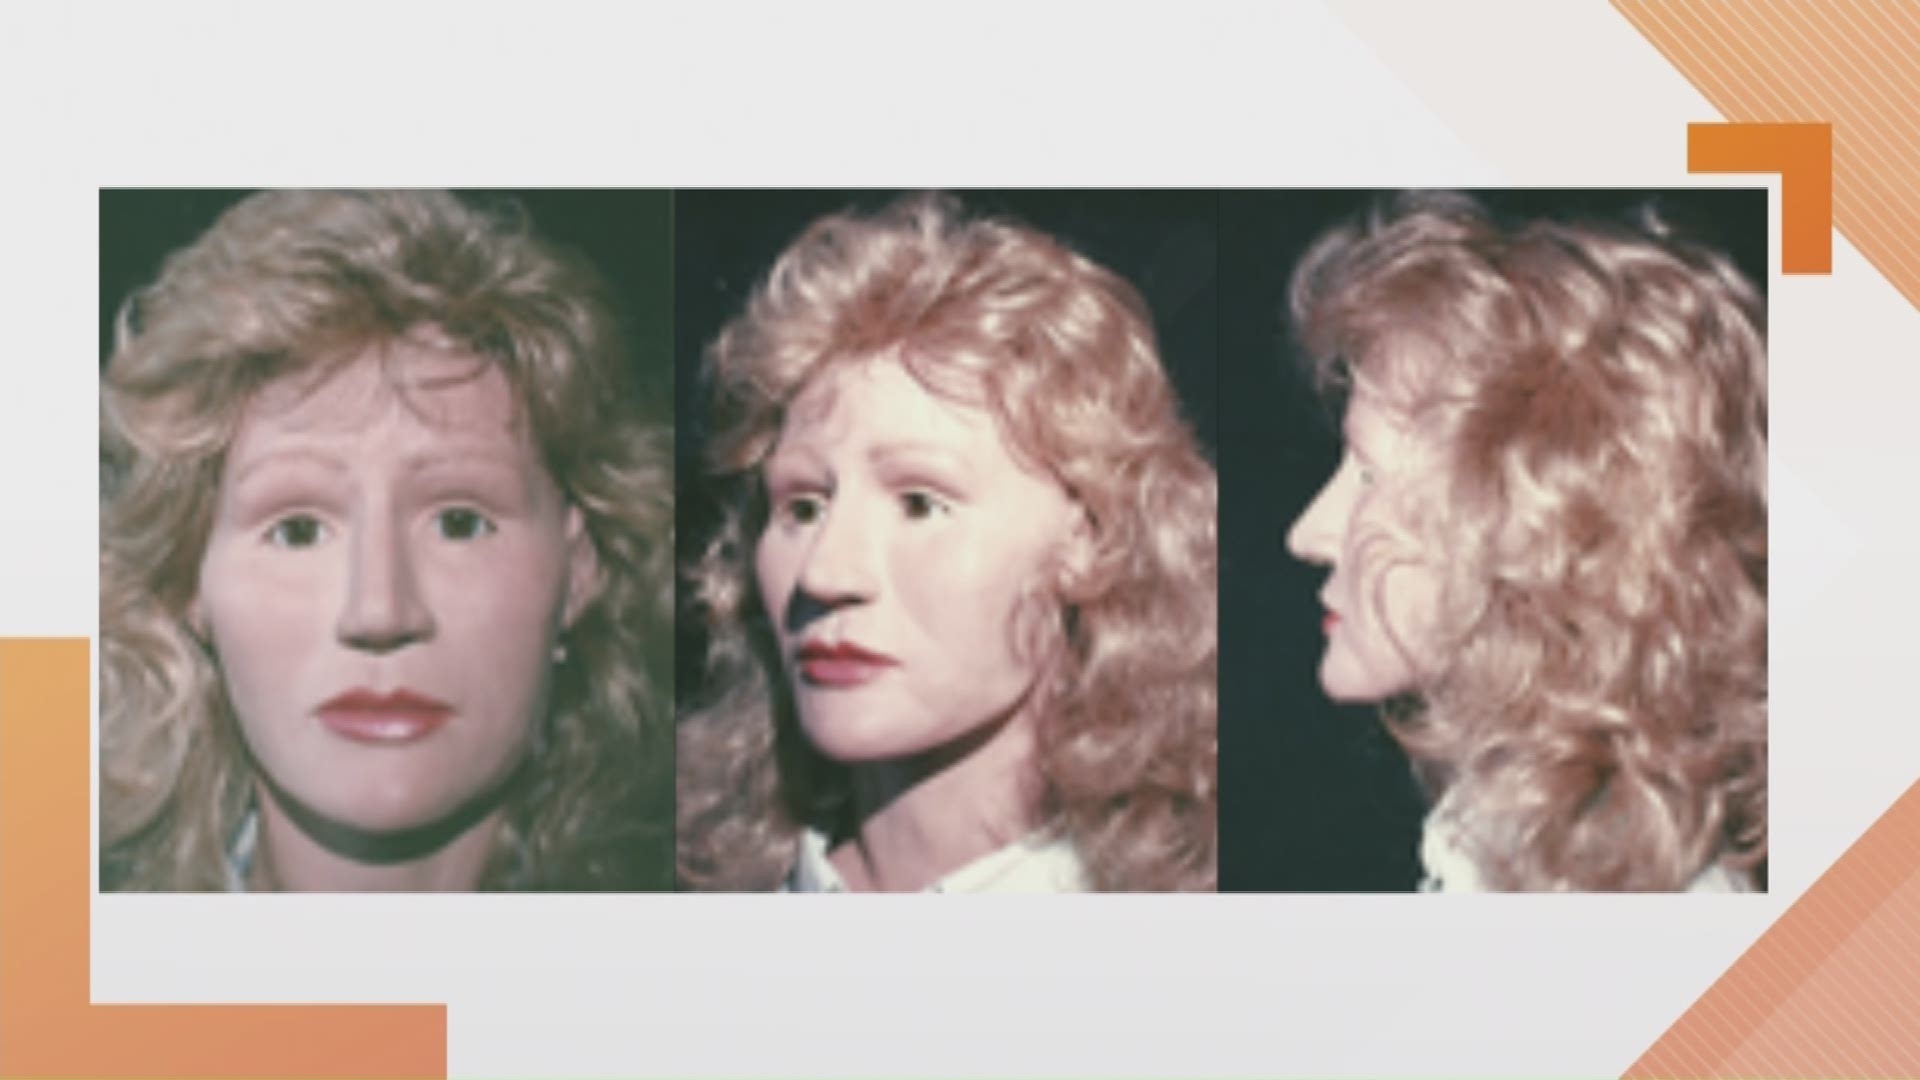 MSP trying to ID remains from 1988 cold case death